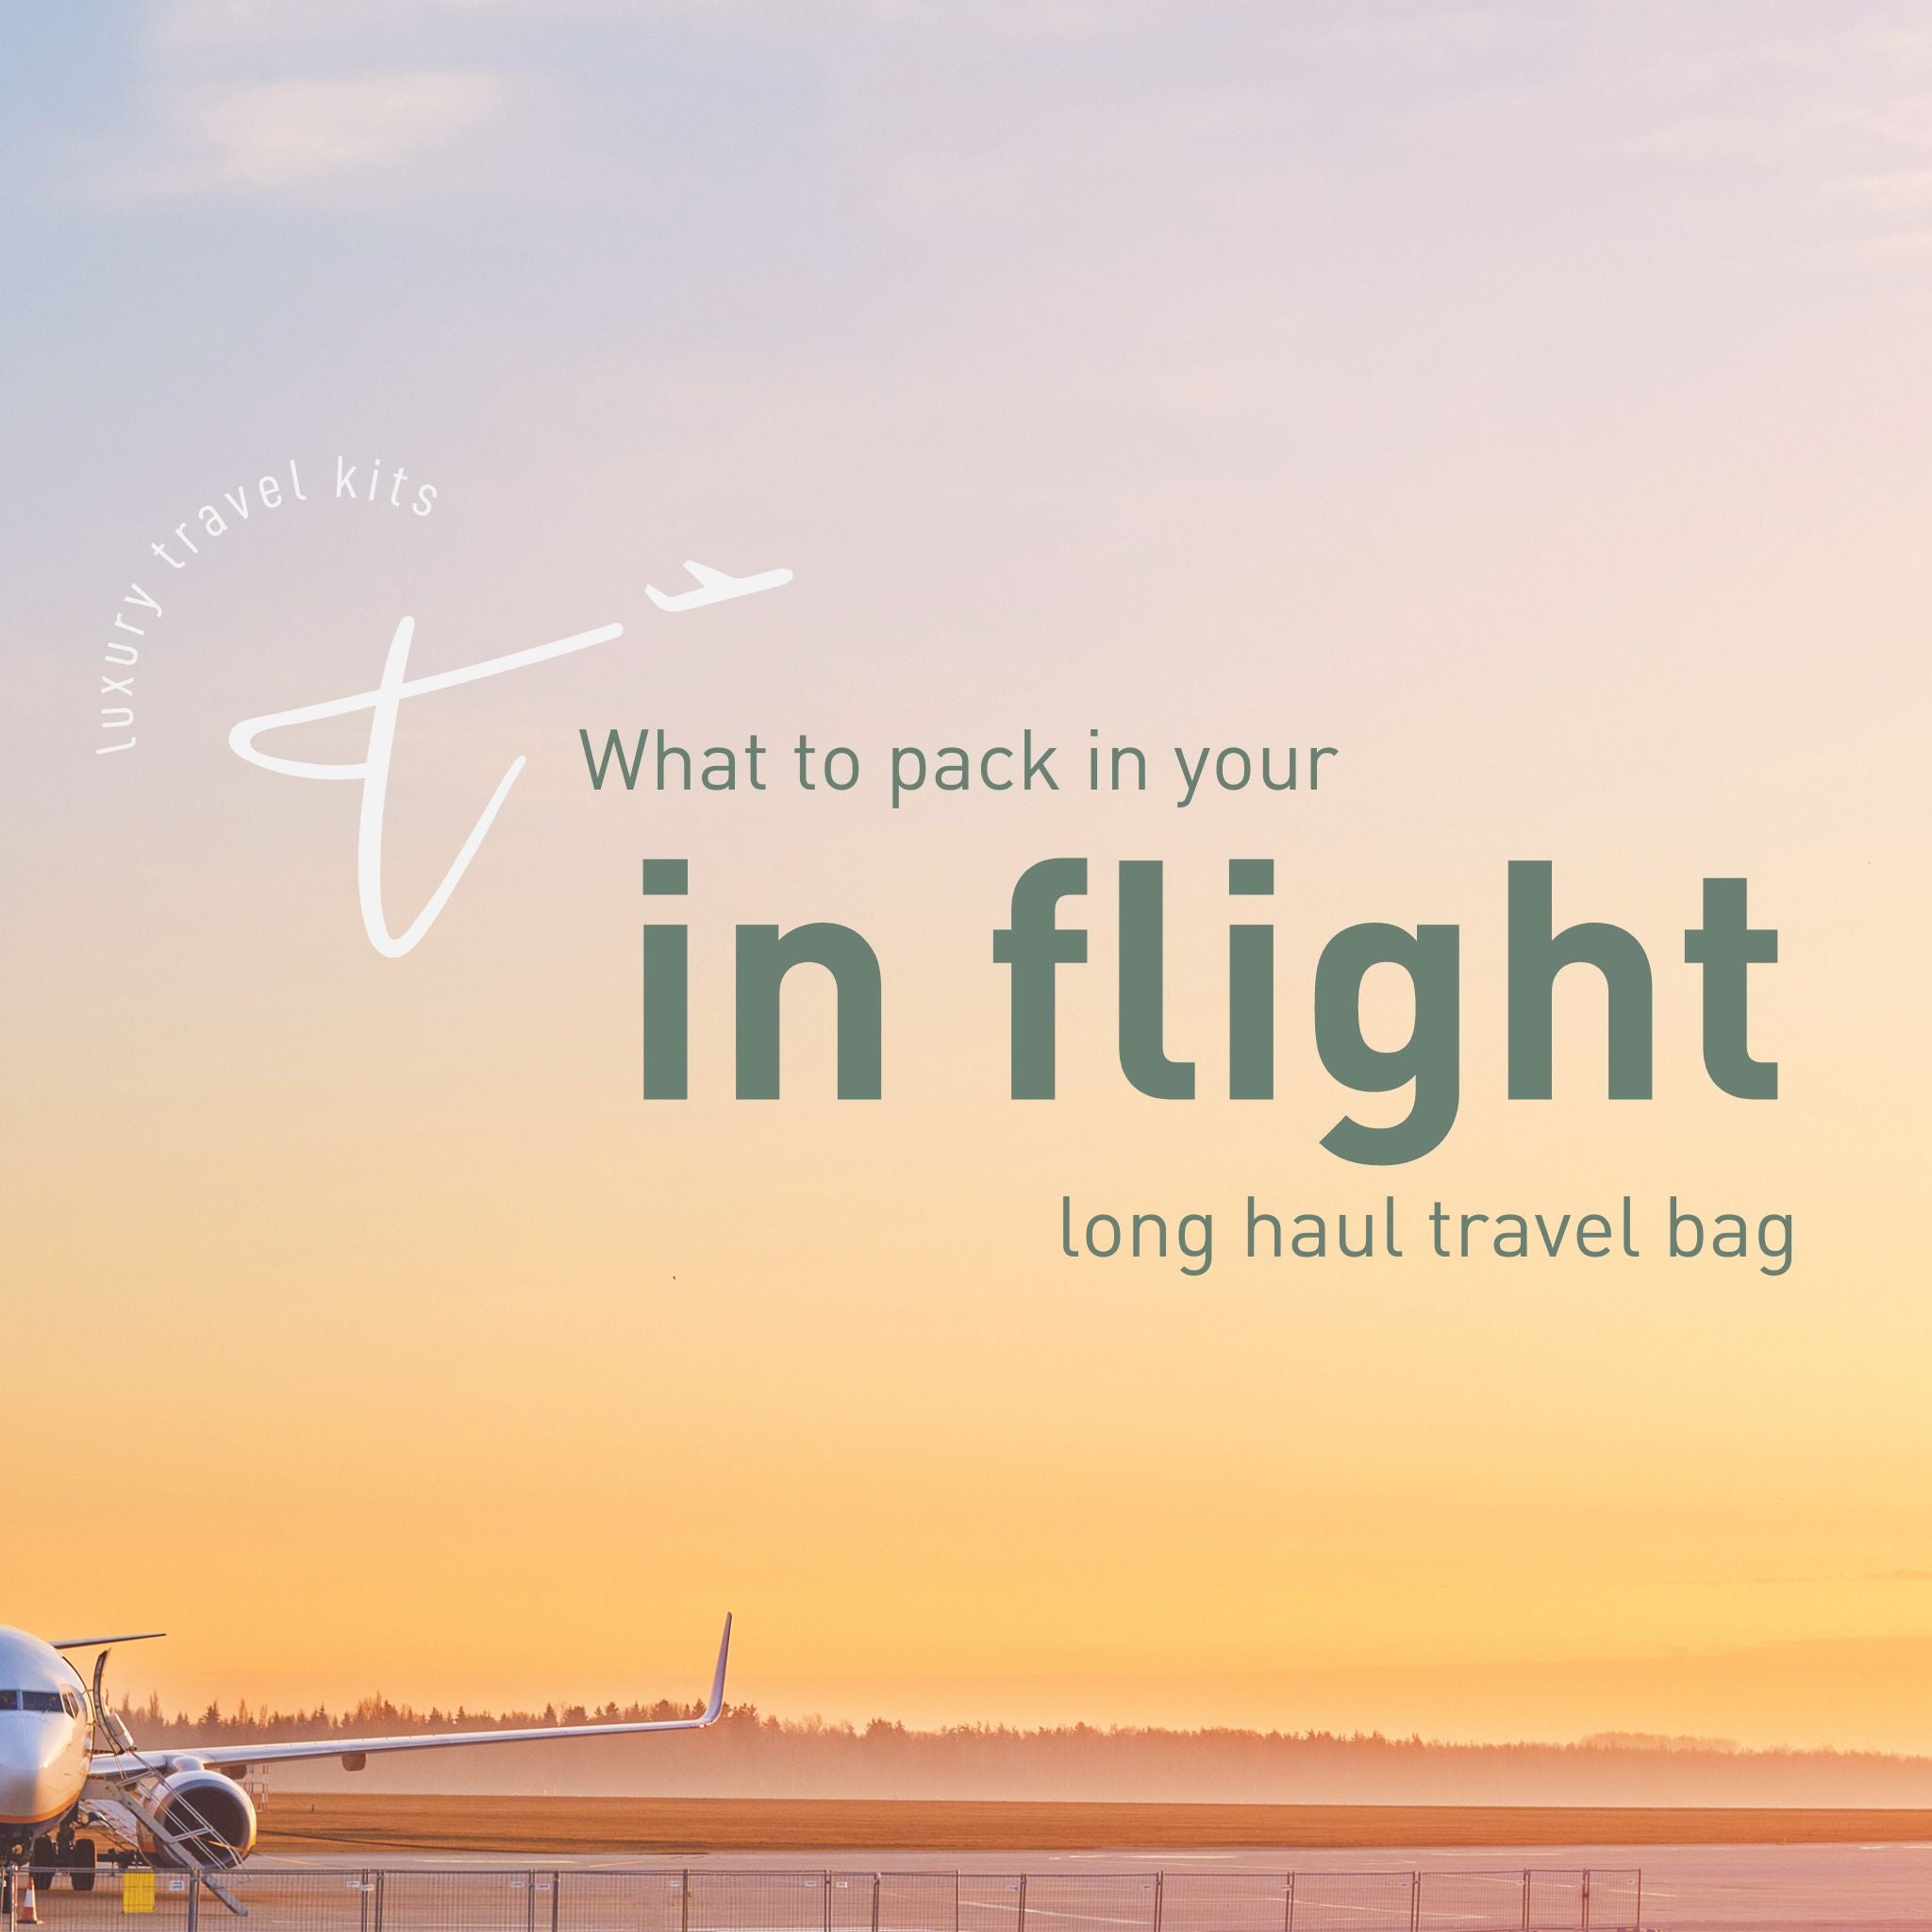 What to pack in your long haul cabin bag